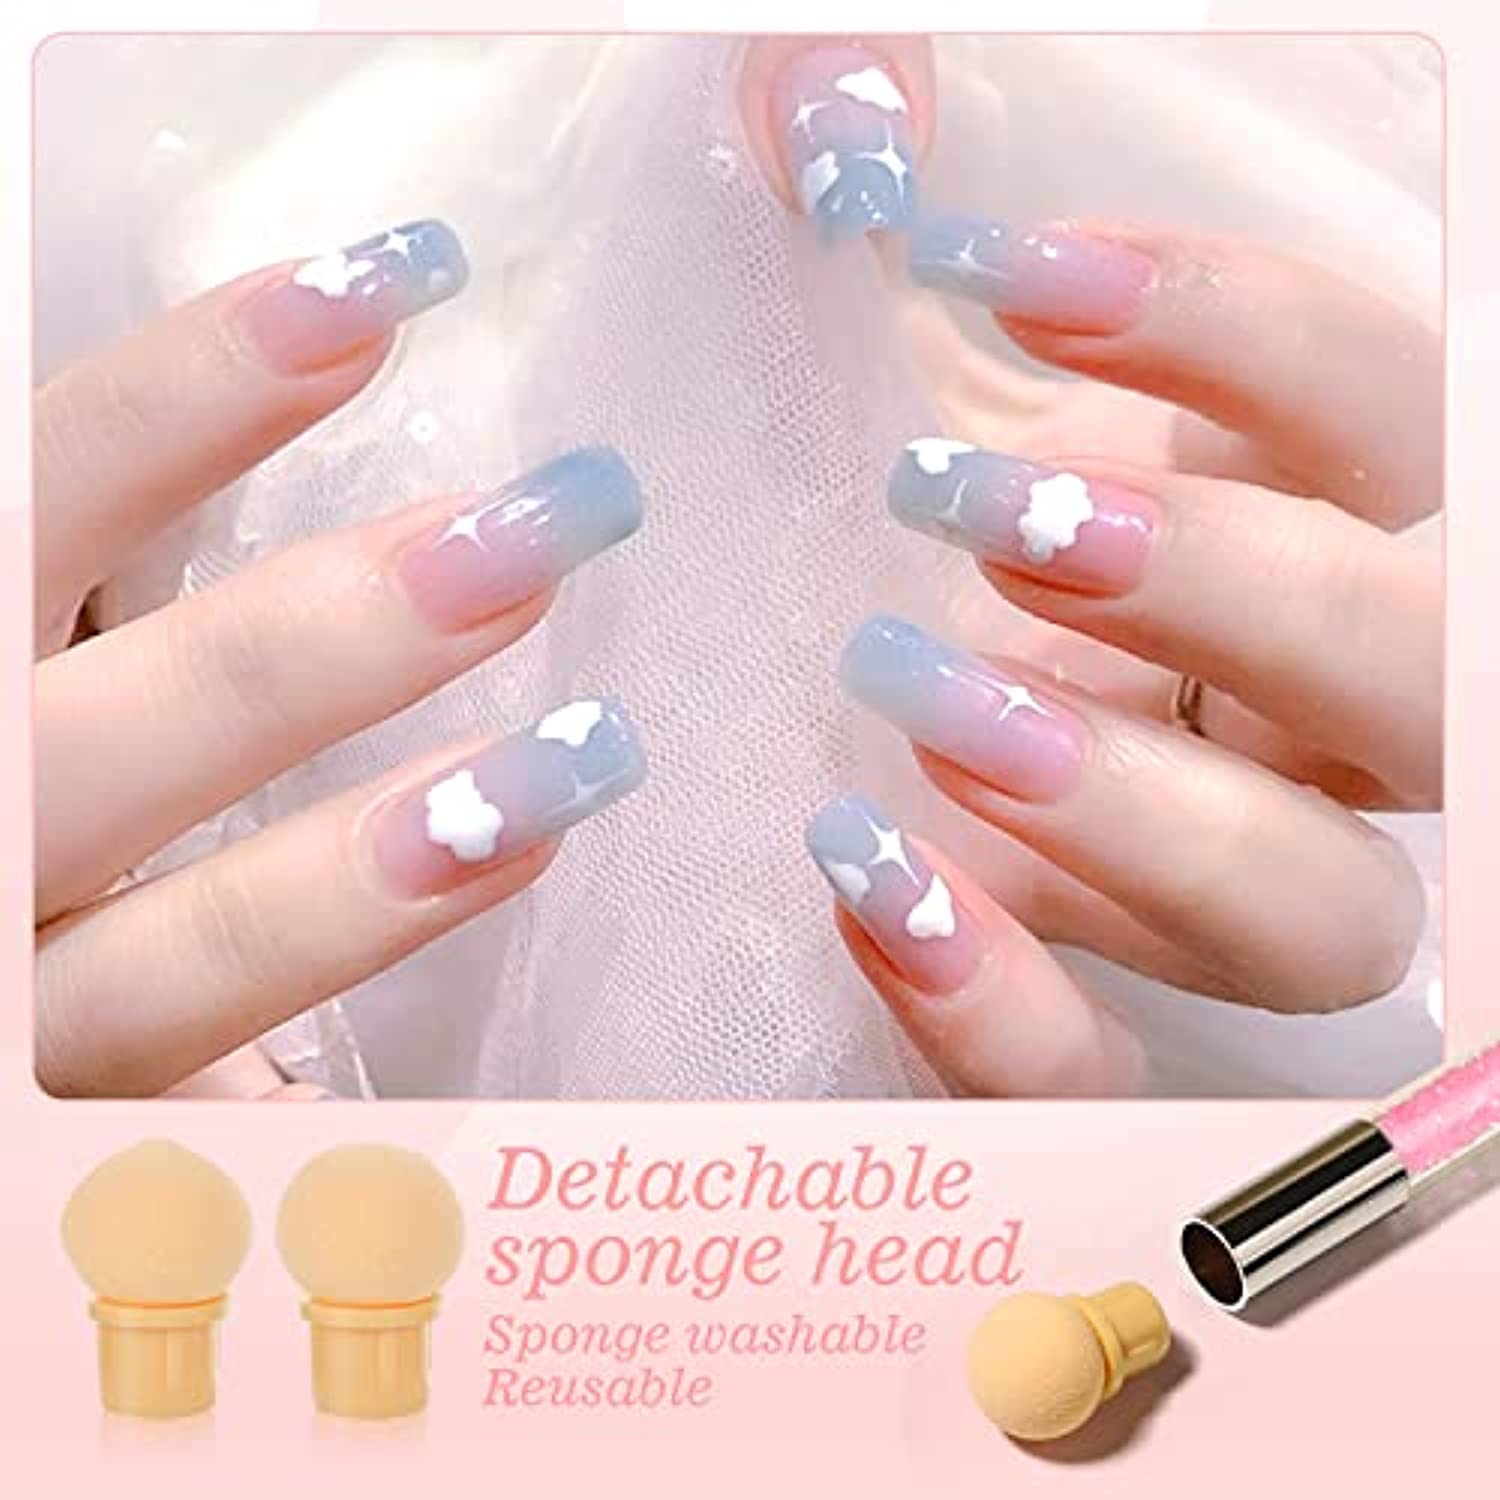 10 Pcs in 2 Set Nail Sponges for Ombre, 2 Pcs Double-Head Ombre Brush for Gel Nails with 8 Pcs Replacement Head (Pink, Blue)